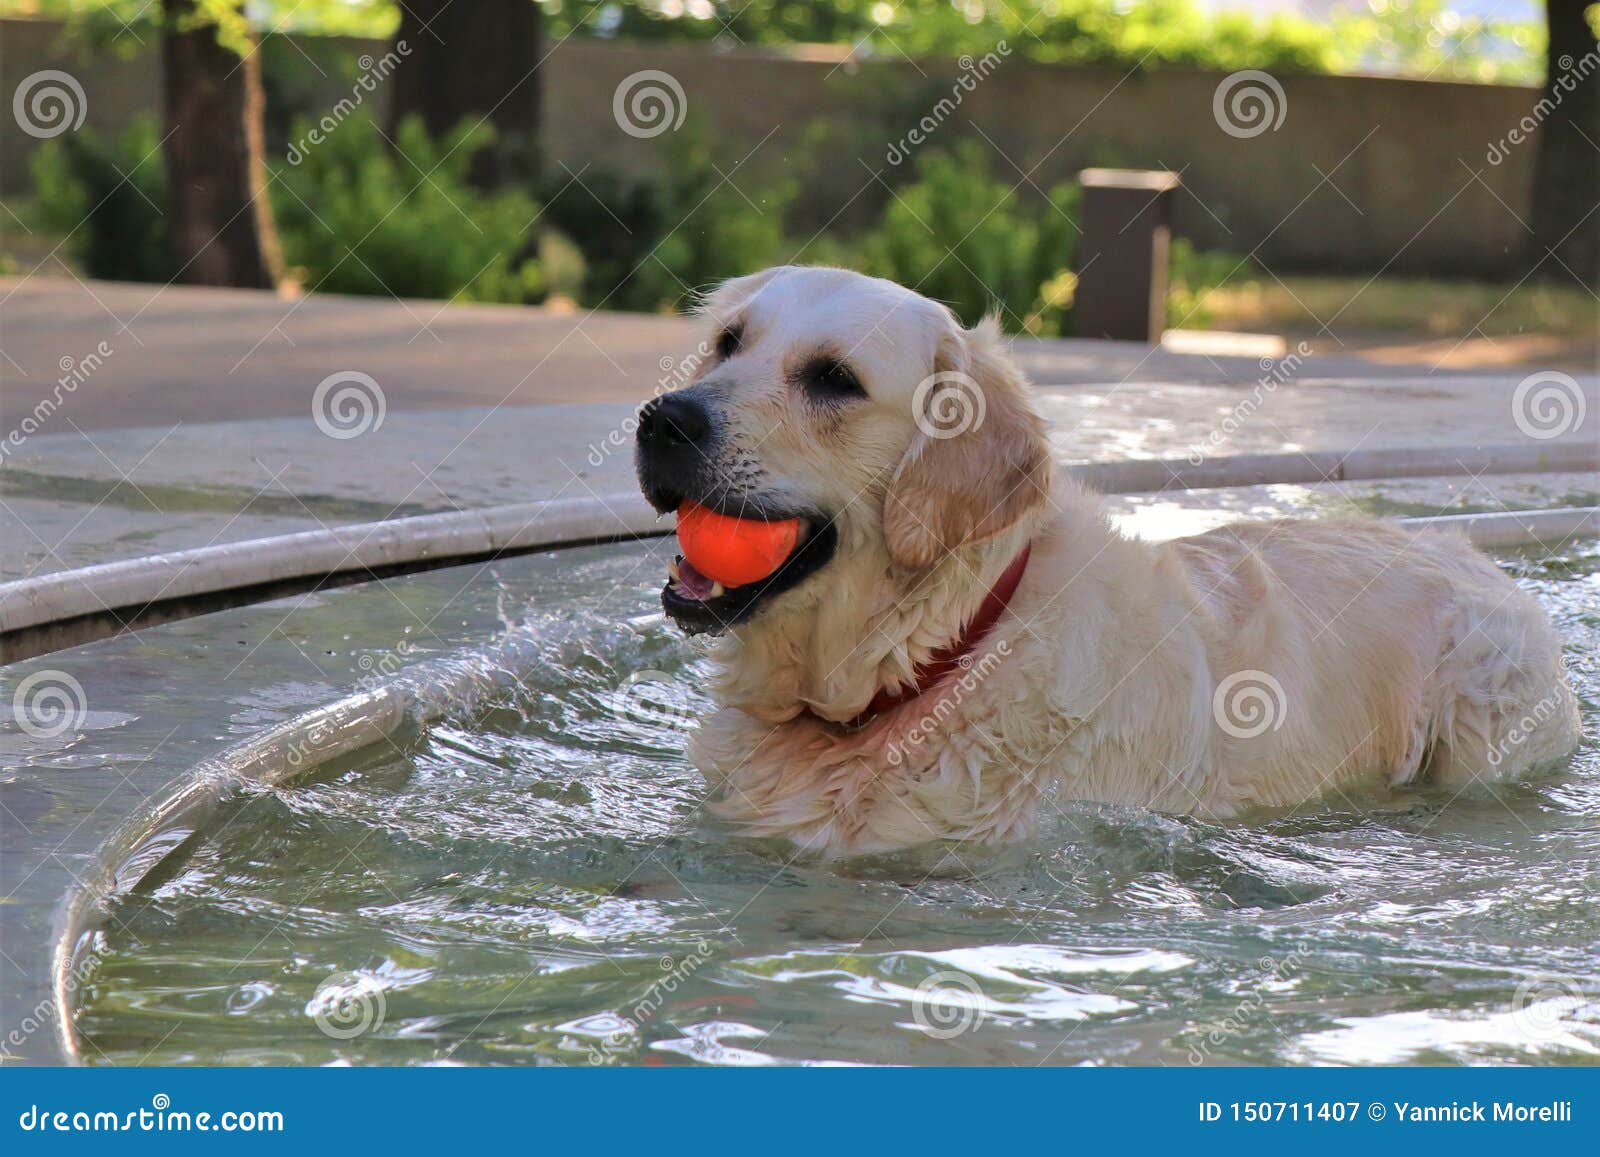 A Dog To Try To Cool Off Takes A Bath In A Fountain Inside A Park While Playing With A Ball Stock Image Image Of Leisure Socialize 150711407